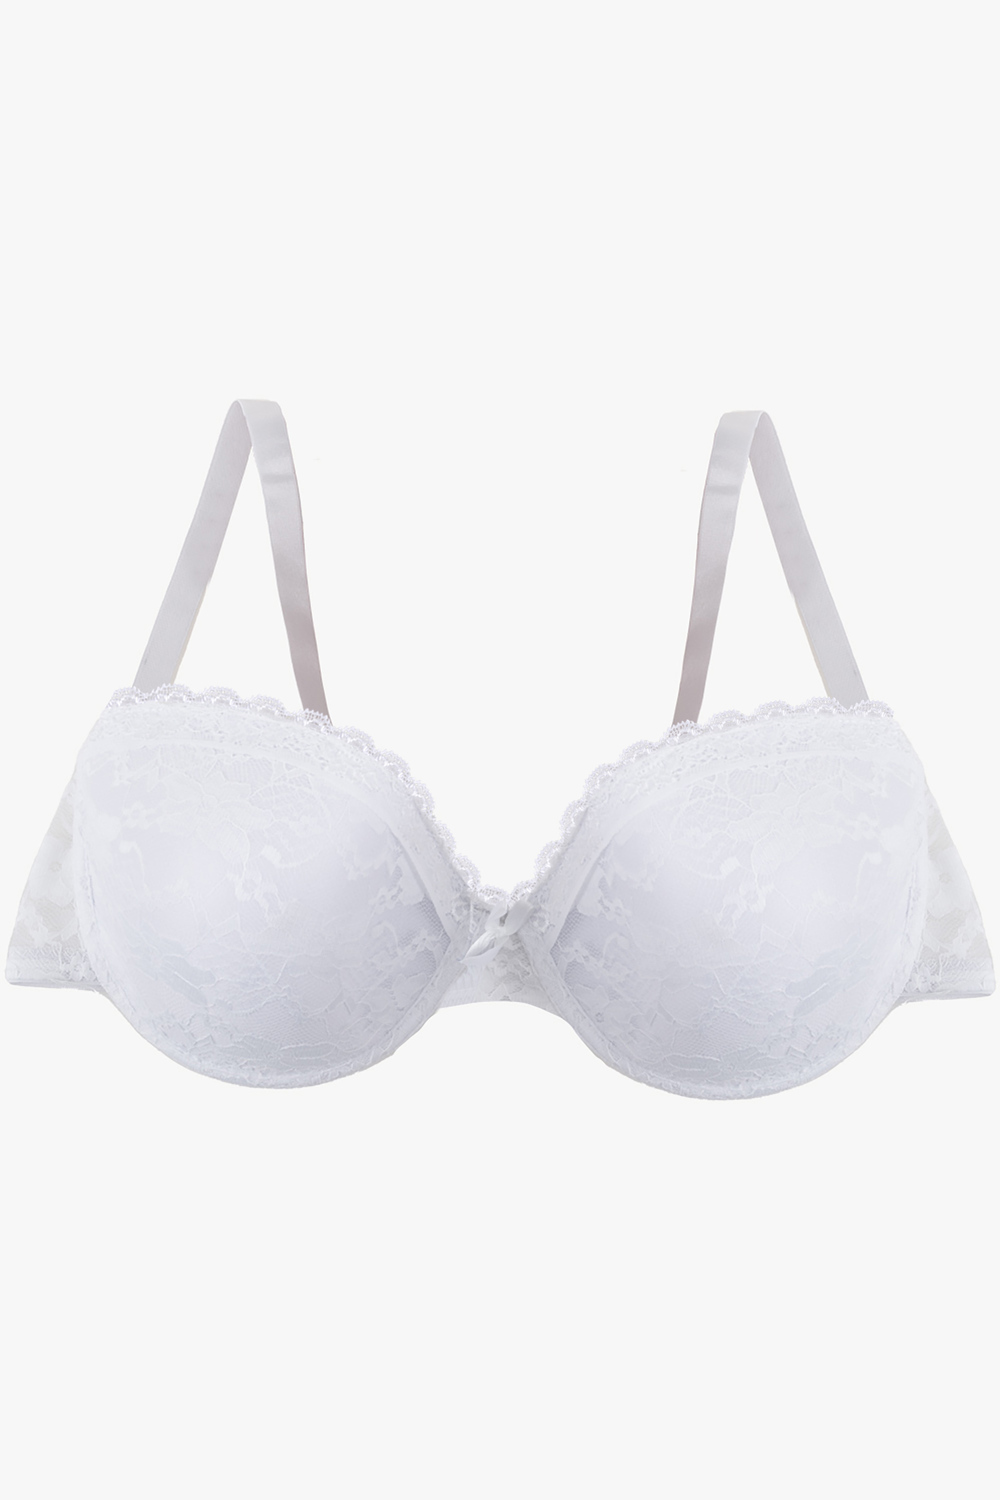 White Bra Ladies Satin & Lace Underwired Firm Control Plus Size Large Full  Cup 